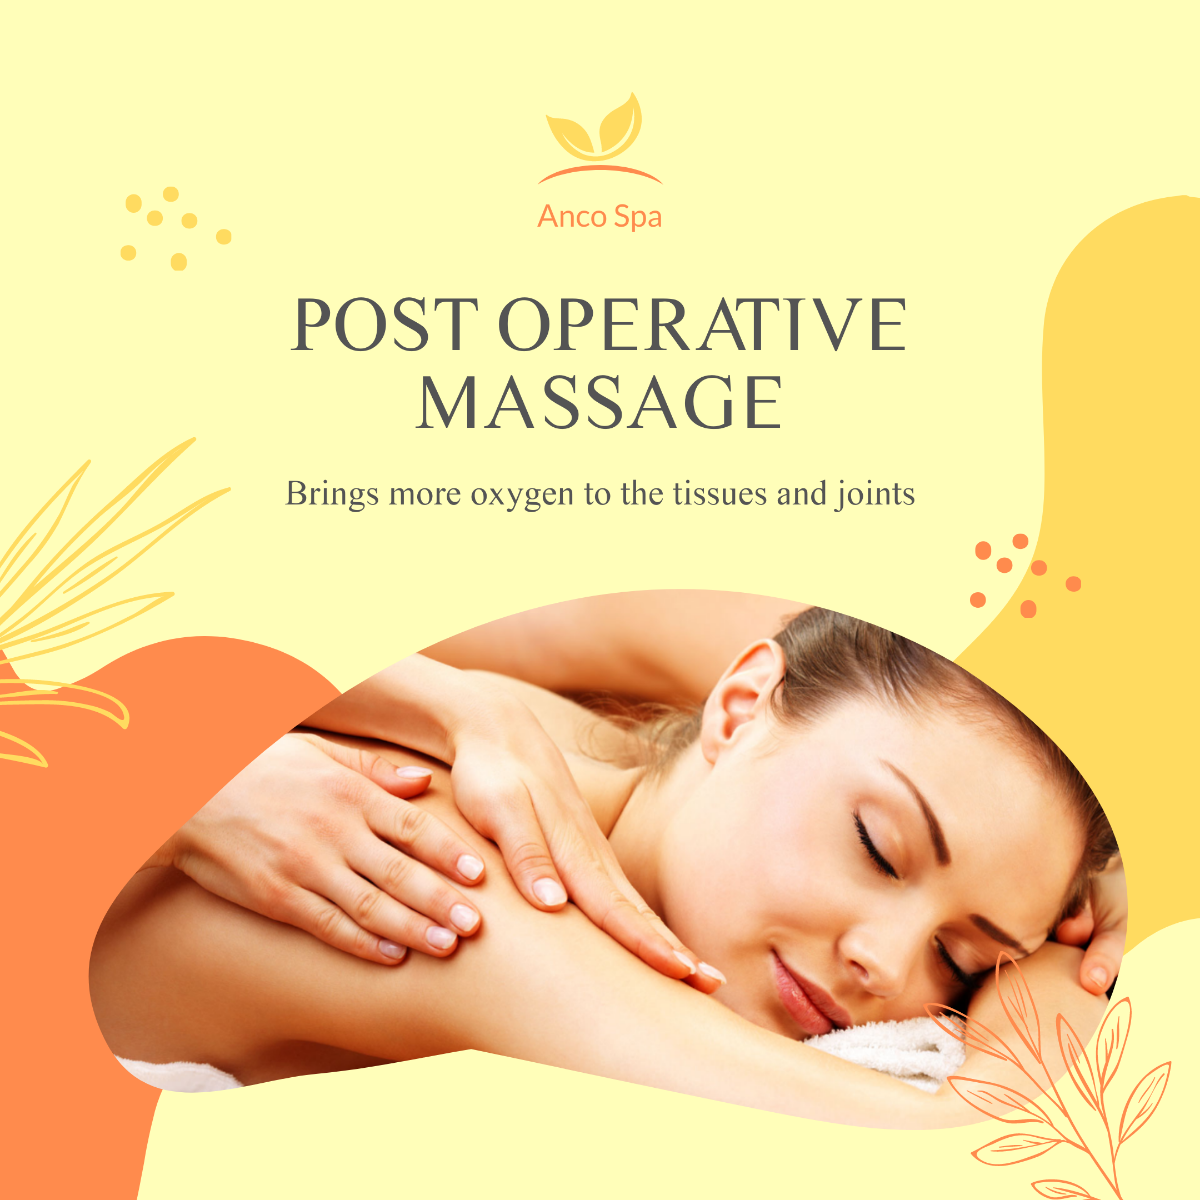 Post Operative Massage Therapy Post, Facebook, Instagram